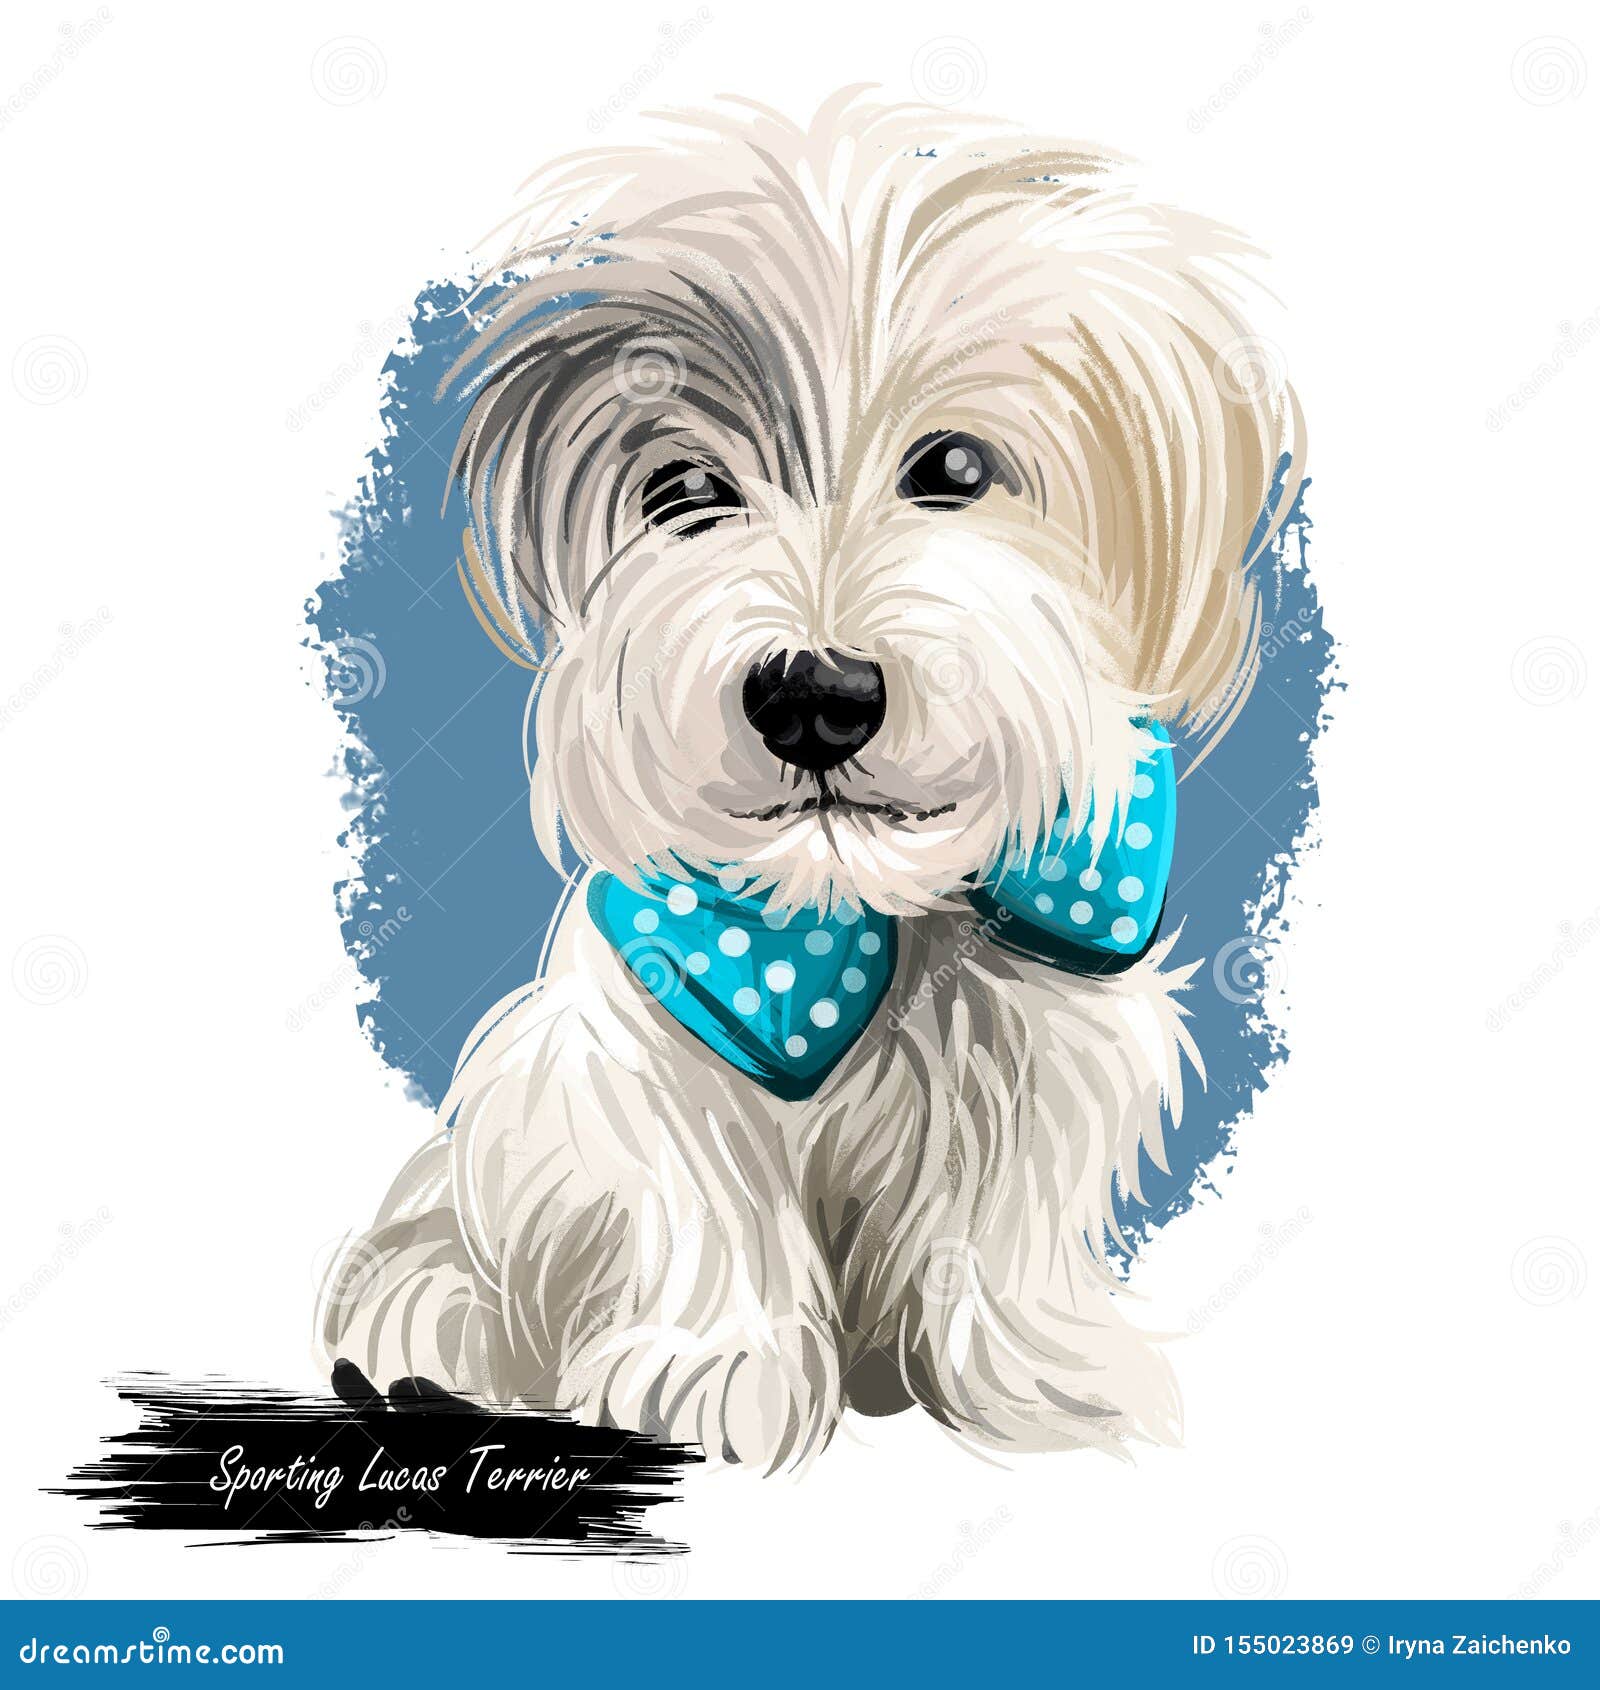 Sporting Lucas Terrier Breed Of Dog Of Terrier Type Isolated On White Digital Art Animal Watercolor Portrait Closeup Isolated Stock Illustration Illustration Of American Head 155023869